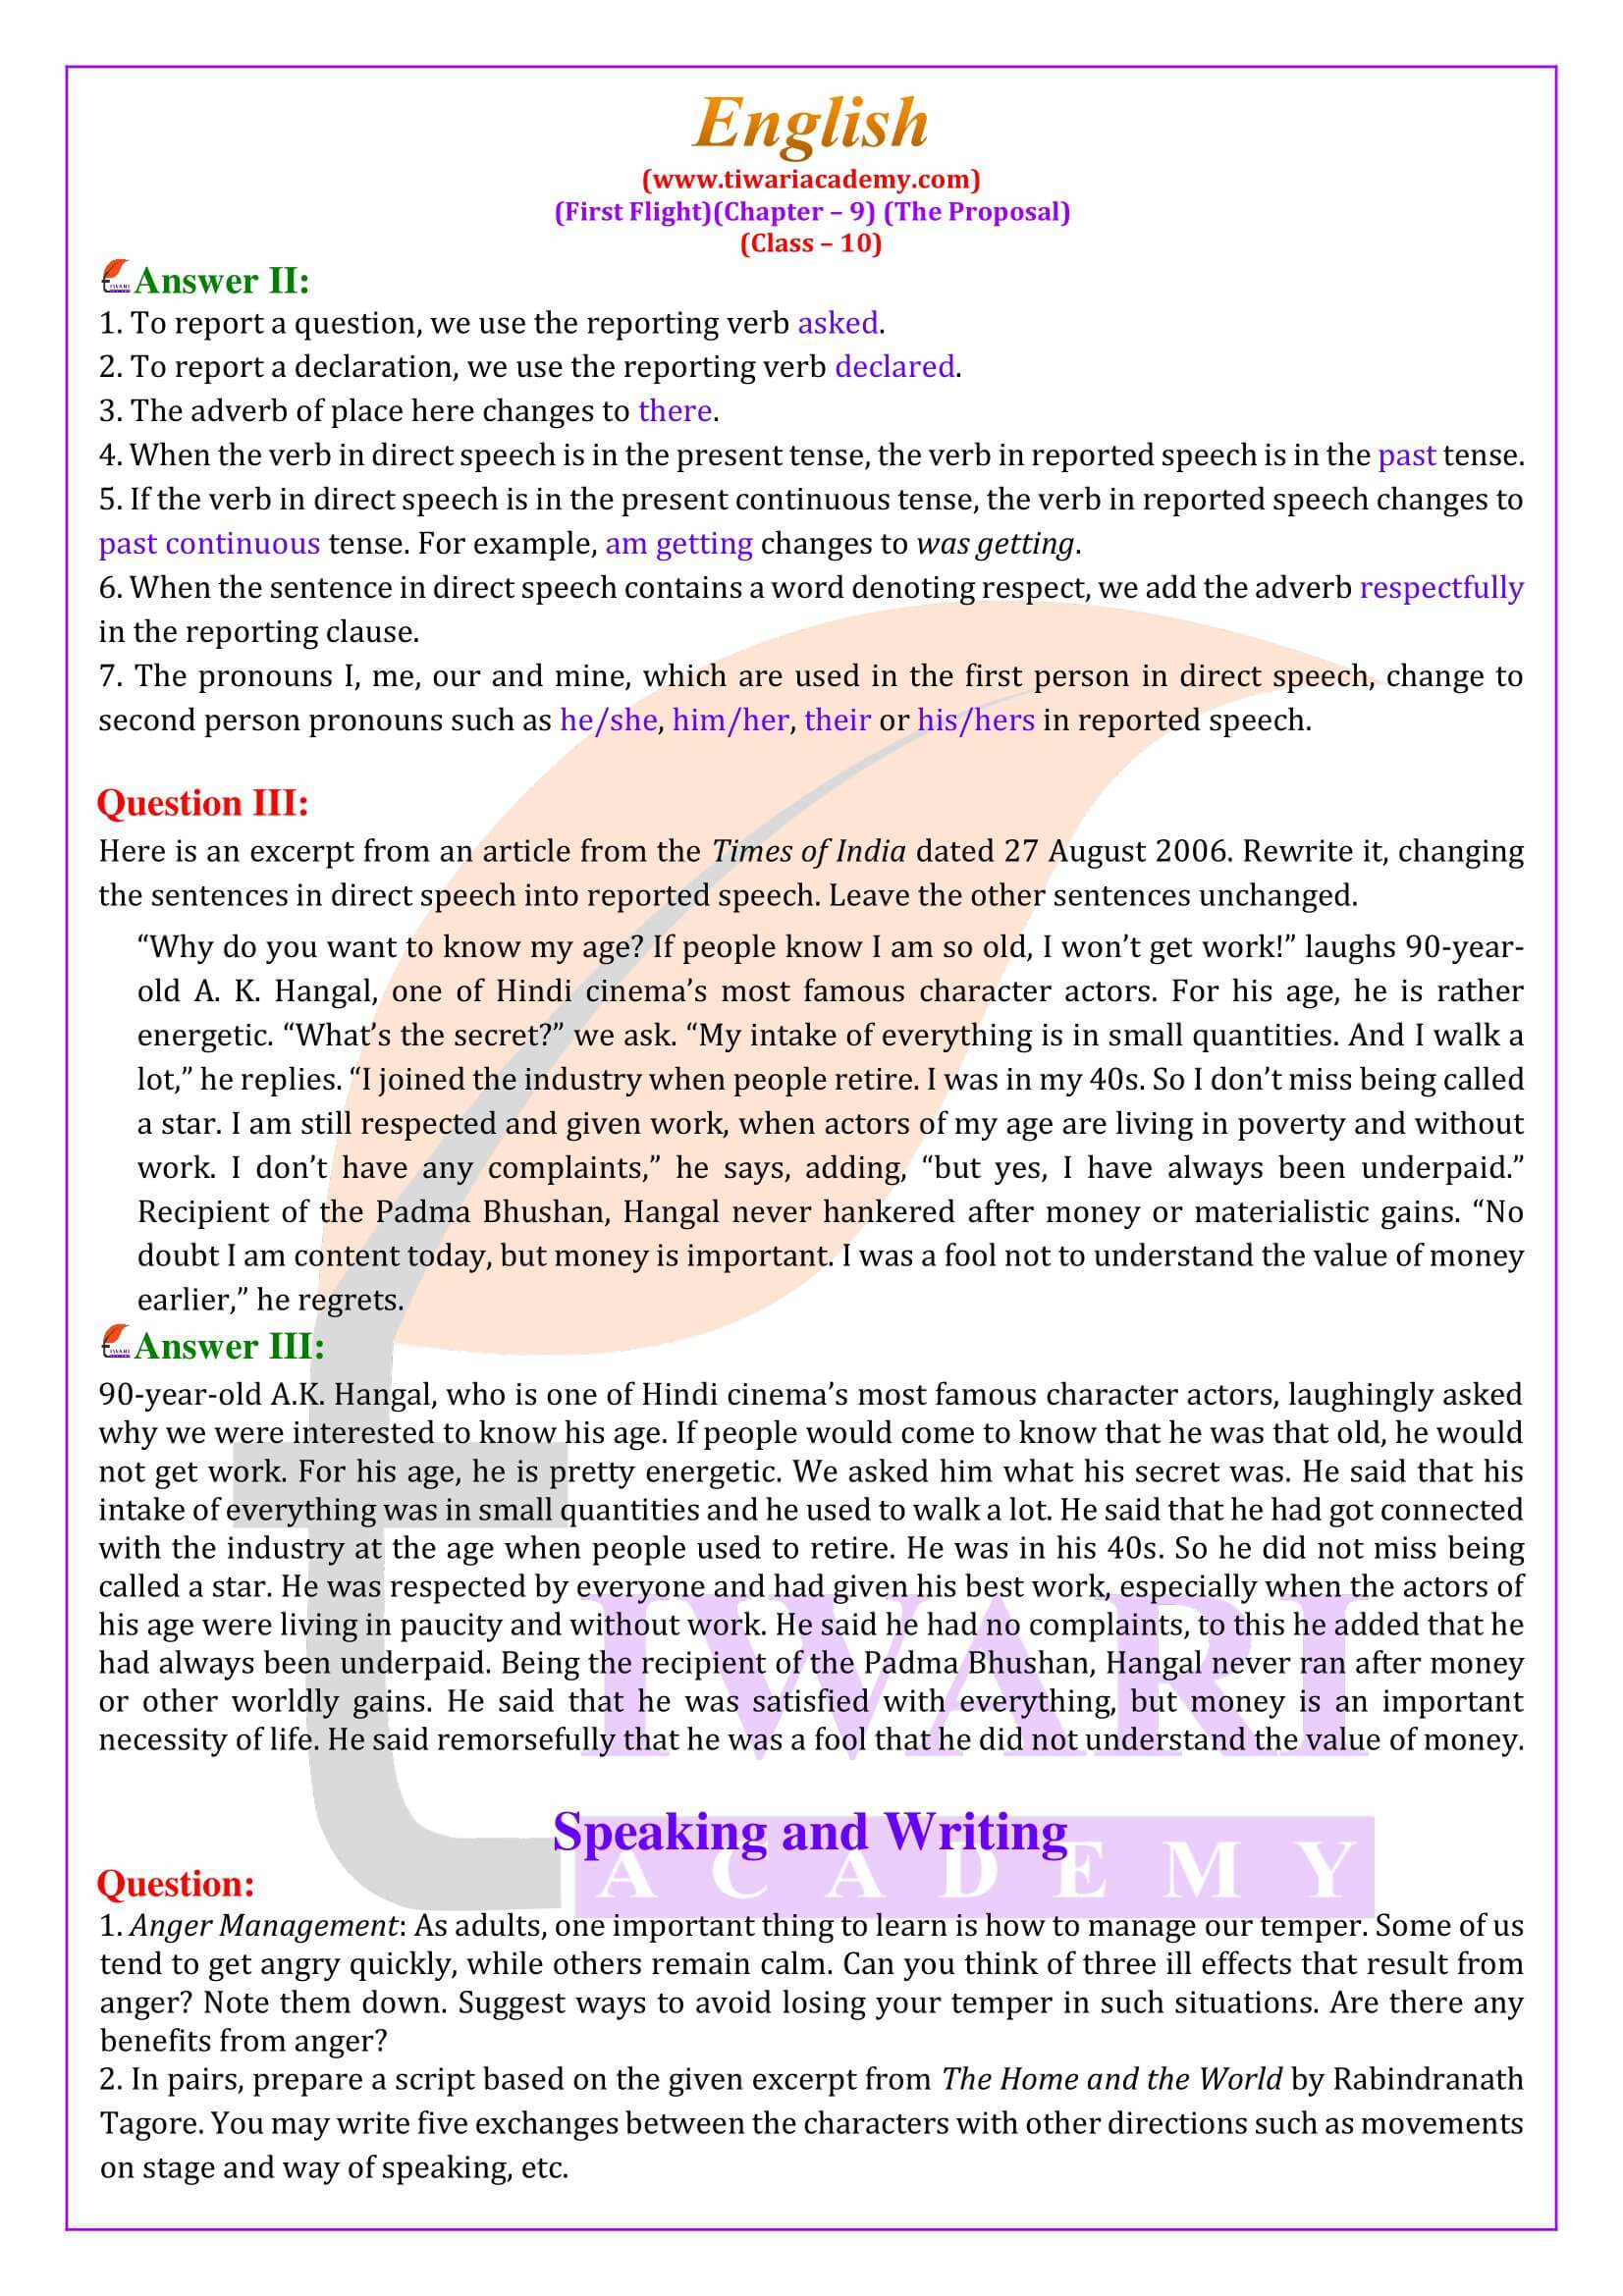 NCERT Solutions for Class 10 English Chapter 9